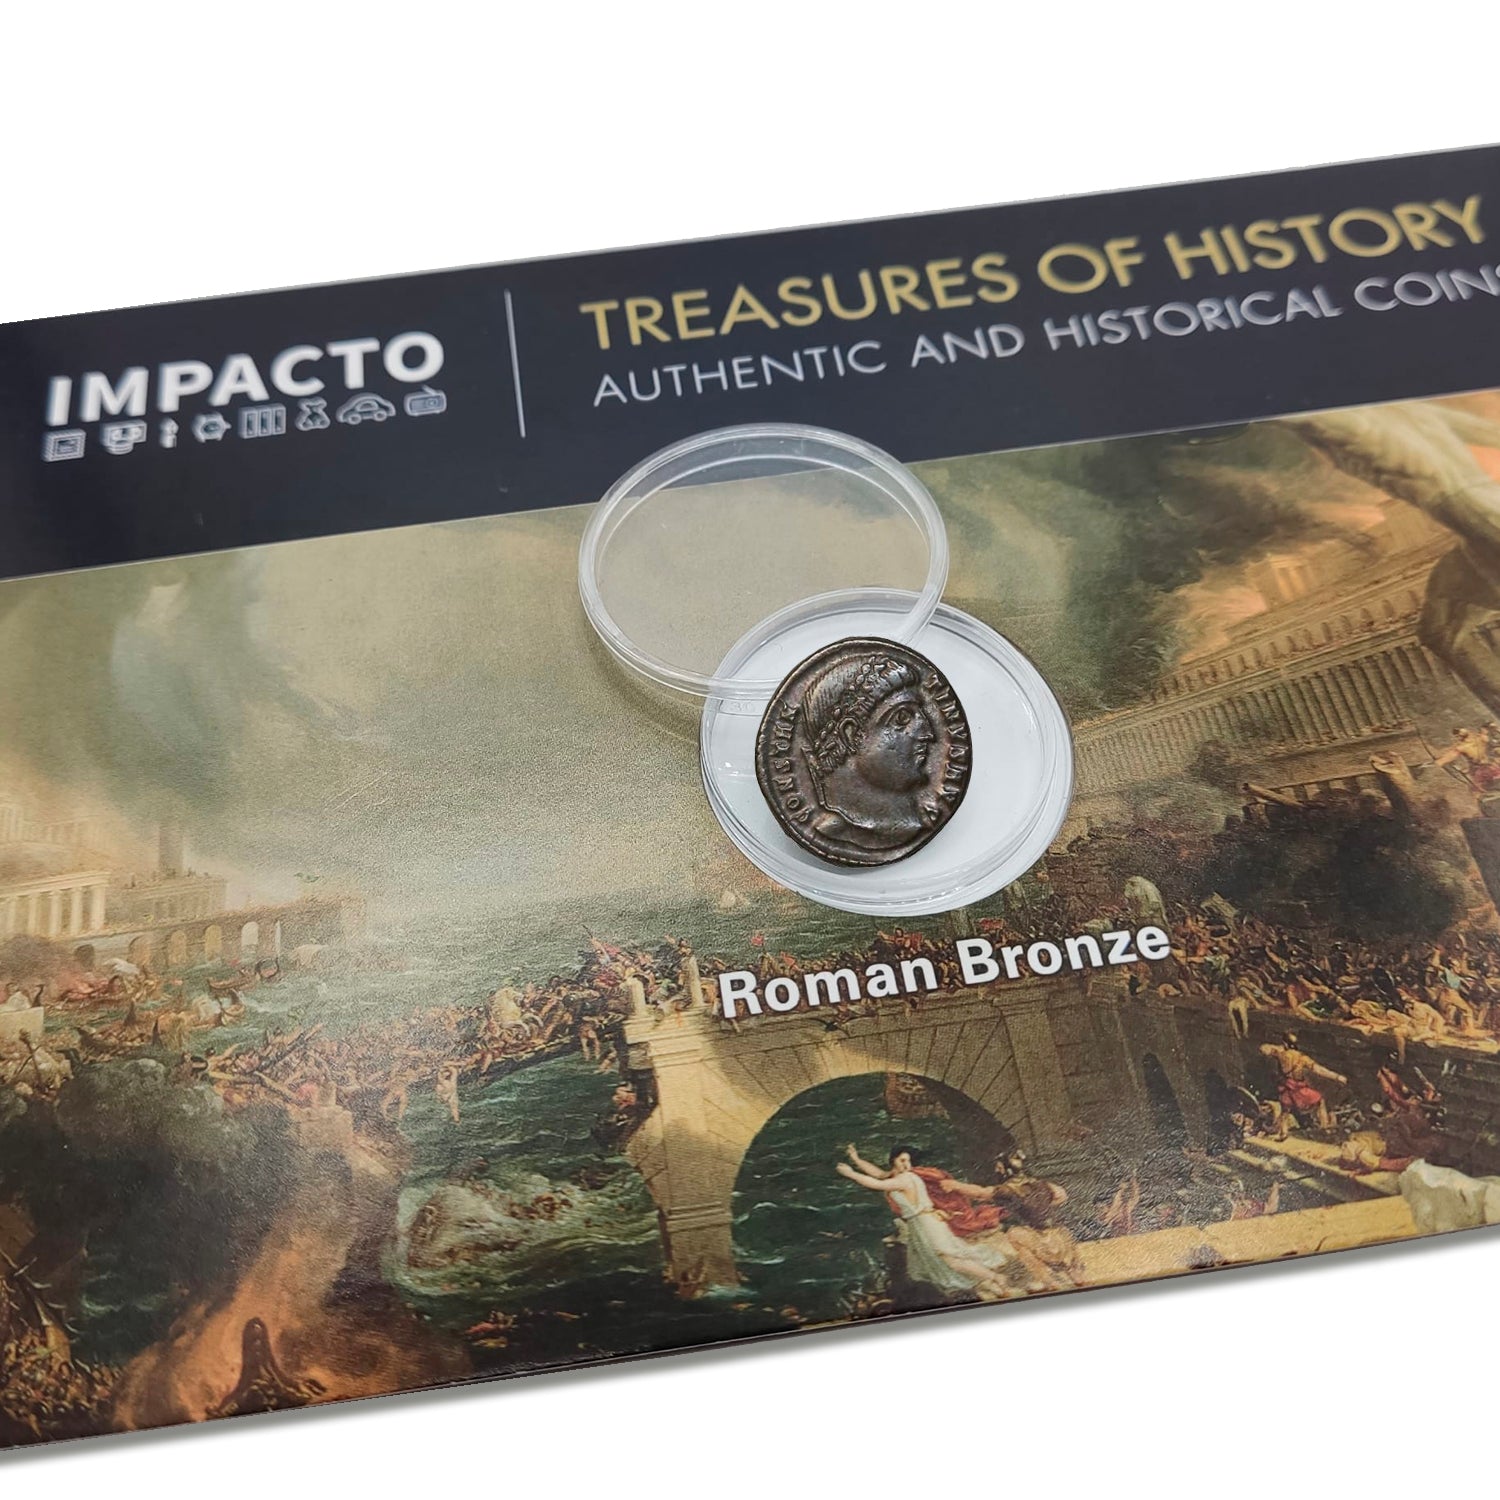 Ancient Coins - Roman Empire, 1 Original Coin of Constantine I the Great, the First Christian Emperor - Includes Certificate of Authenticity